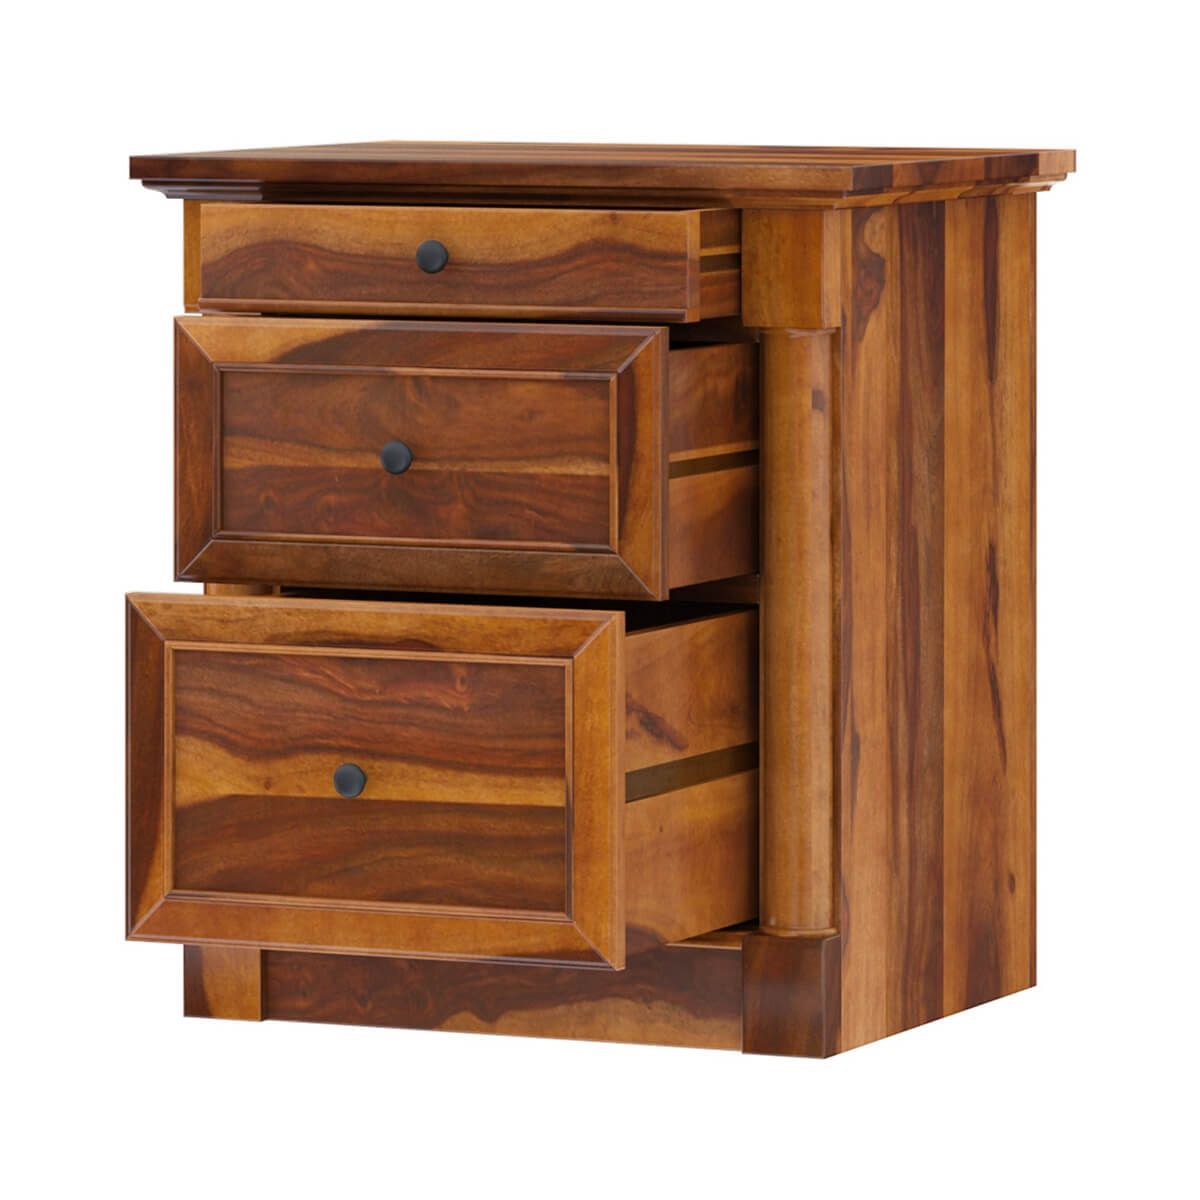 Ansonville Rustic Solid Wood 3 Drawer File Cabinet Throughout Wood Cabinet With Drawers (Gallery 10 of 20)